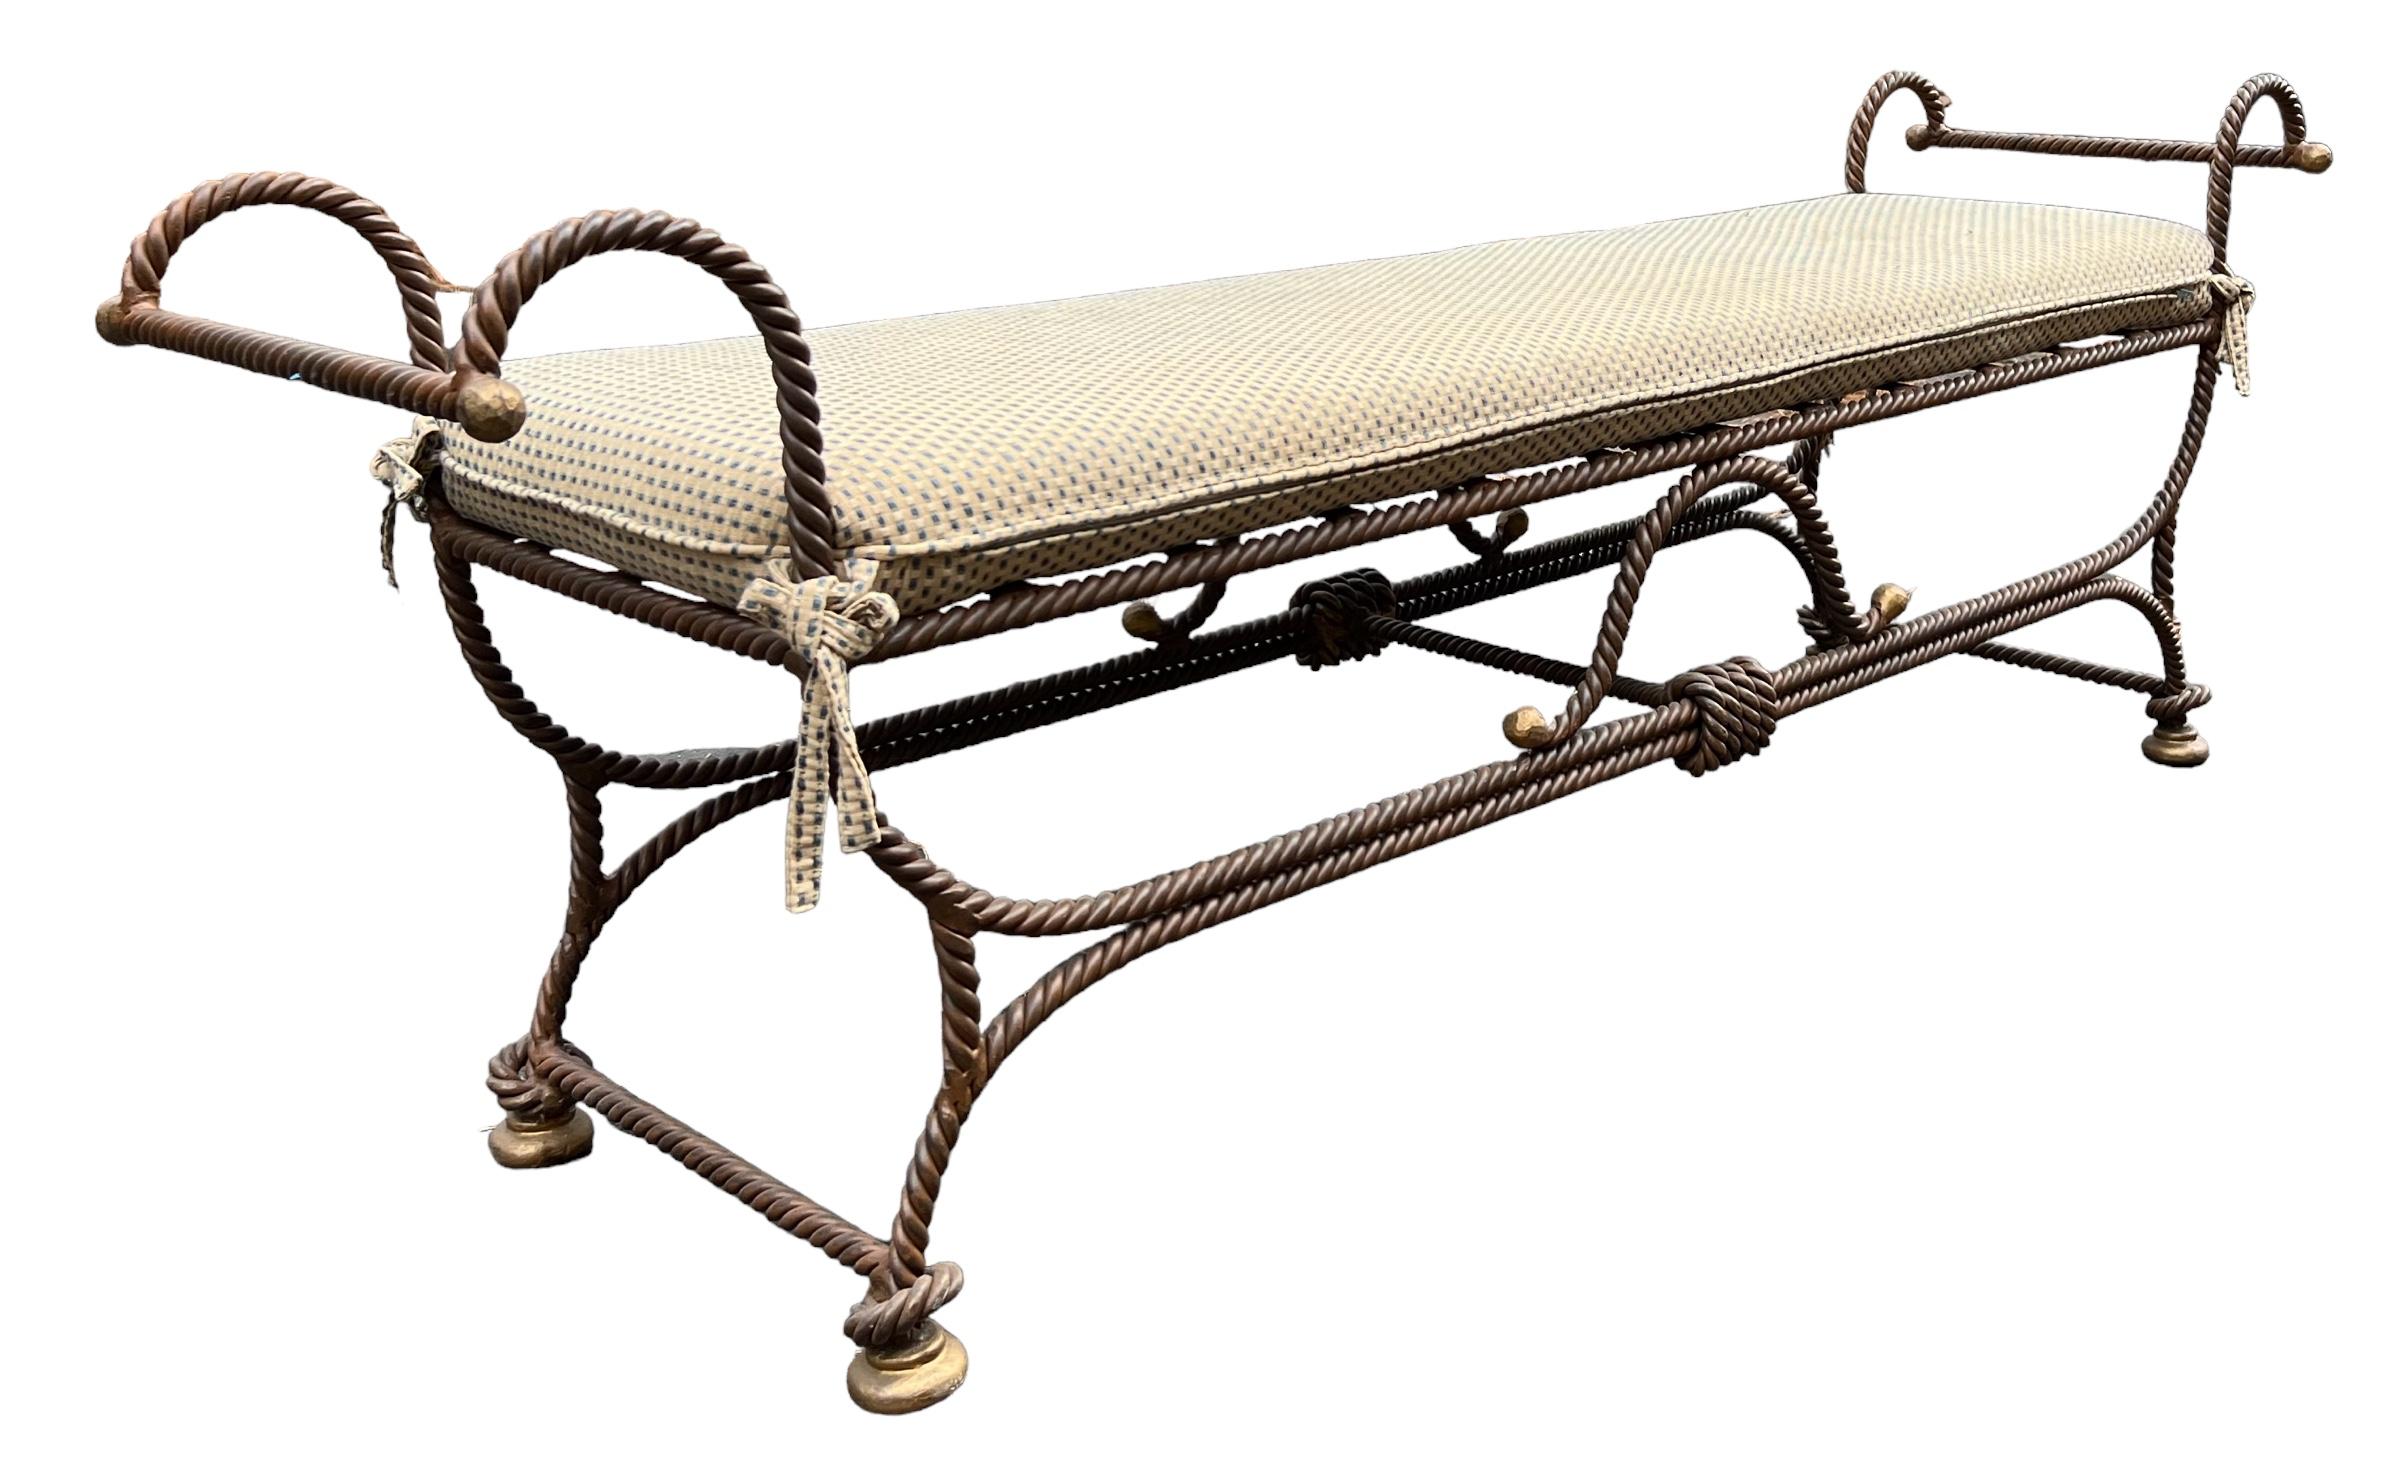 Hollywood Regency Neo-Classical Style Wrought Iron Bench W/ Rope / Tassel Motif For Sale 4